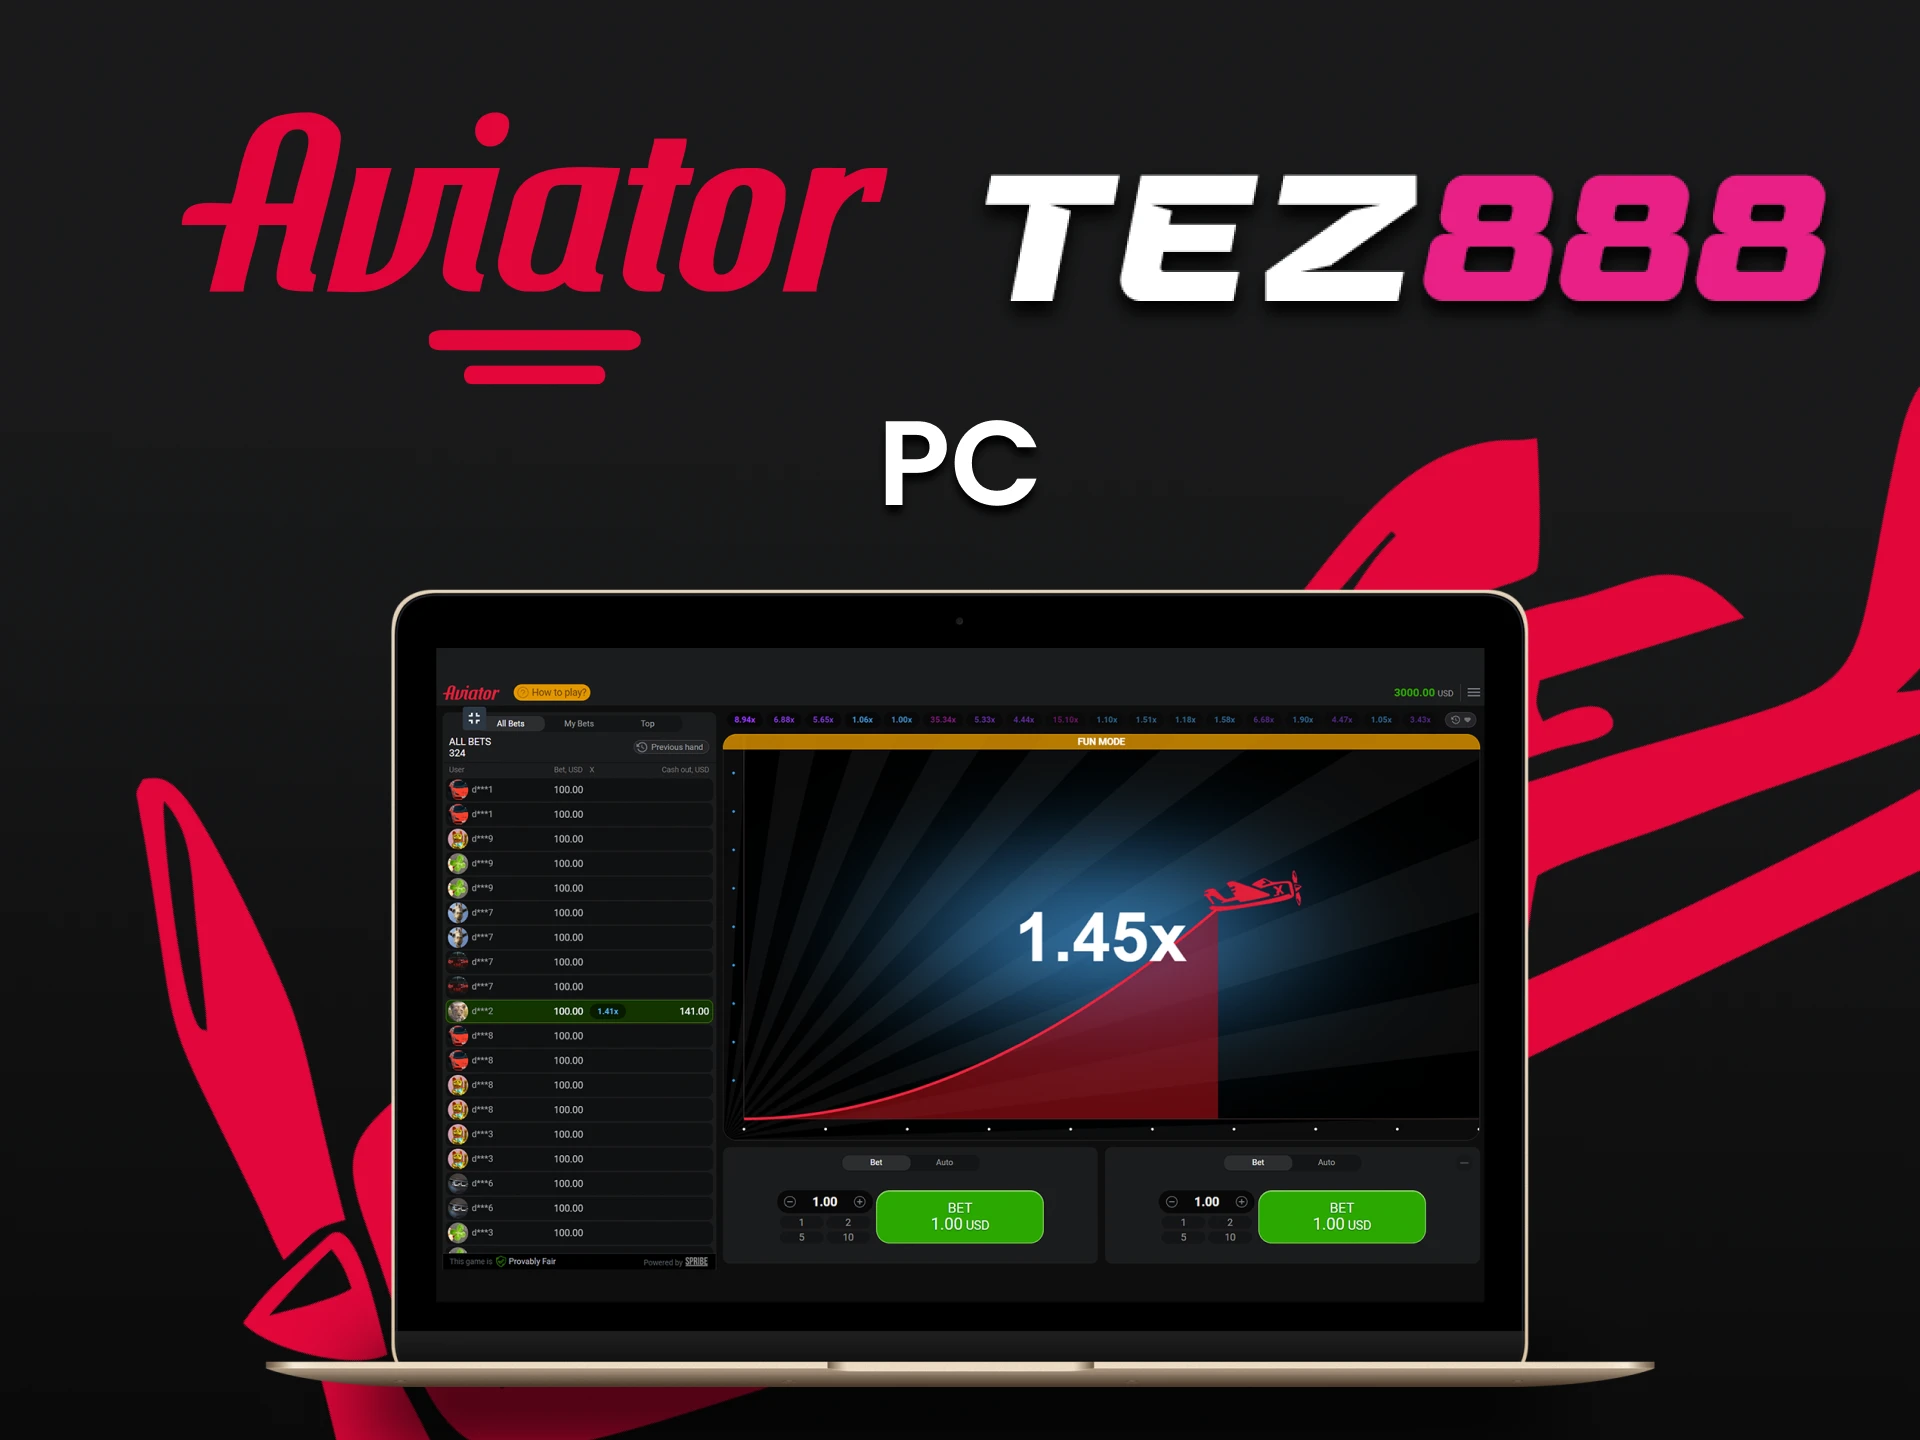 Use your PC to play Aviator on Tez888.